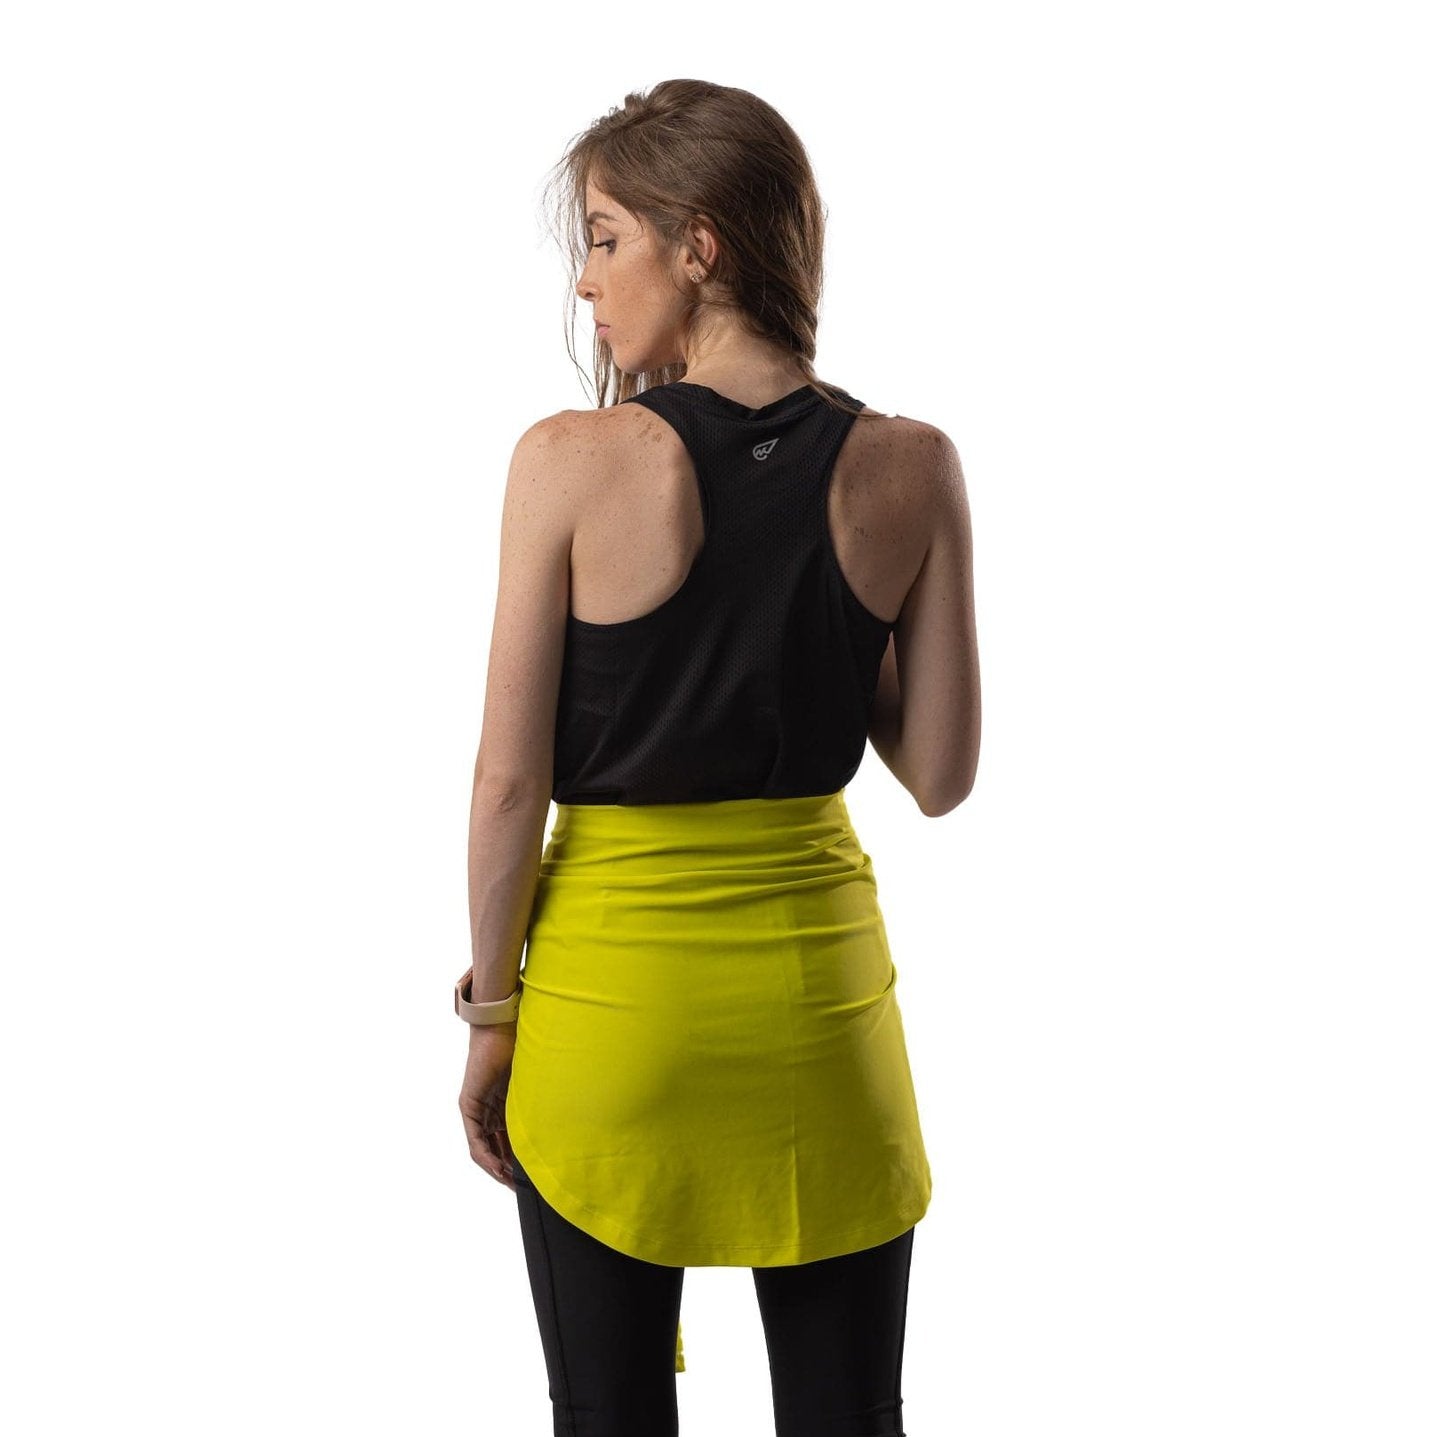 Comfy Hip Cover - Sporty Pro